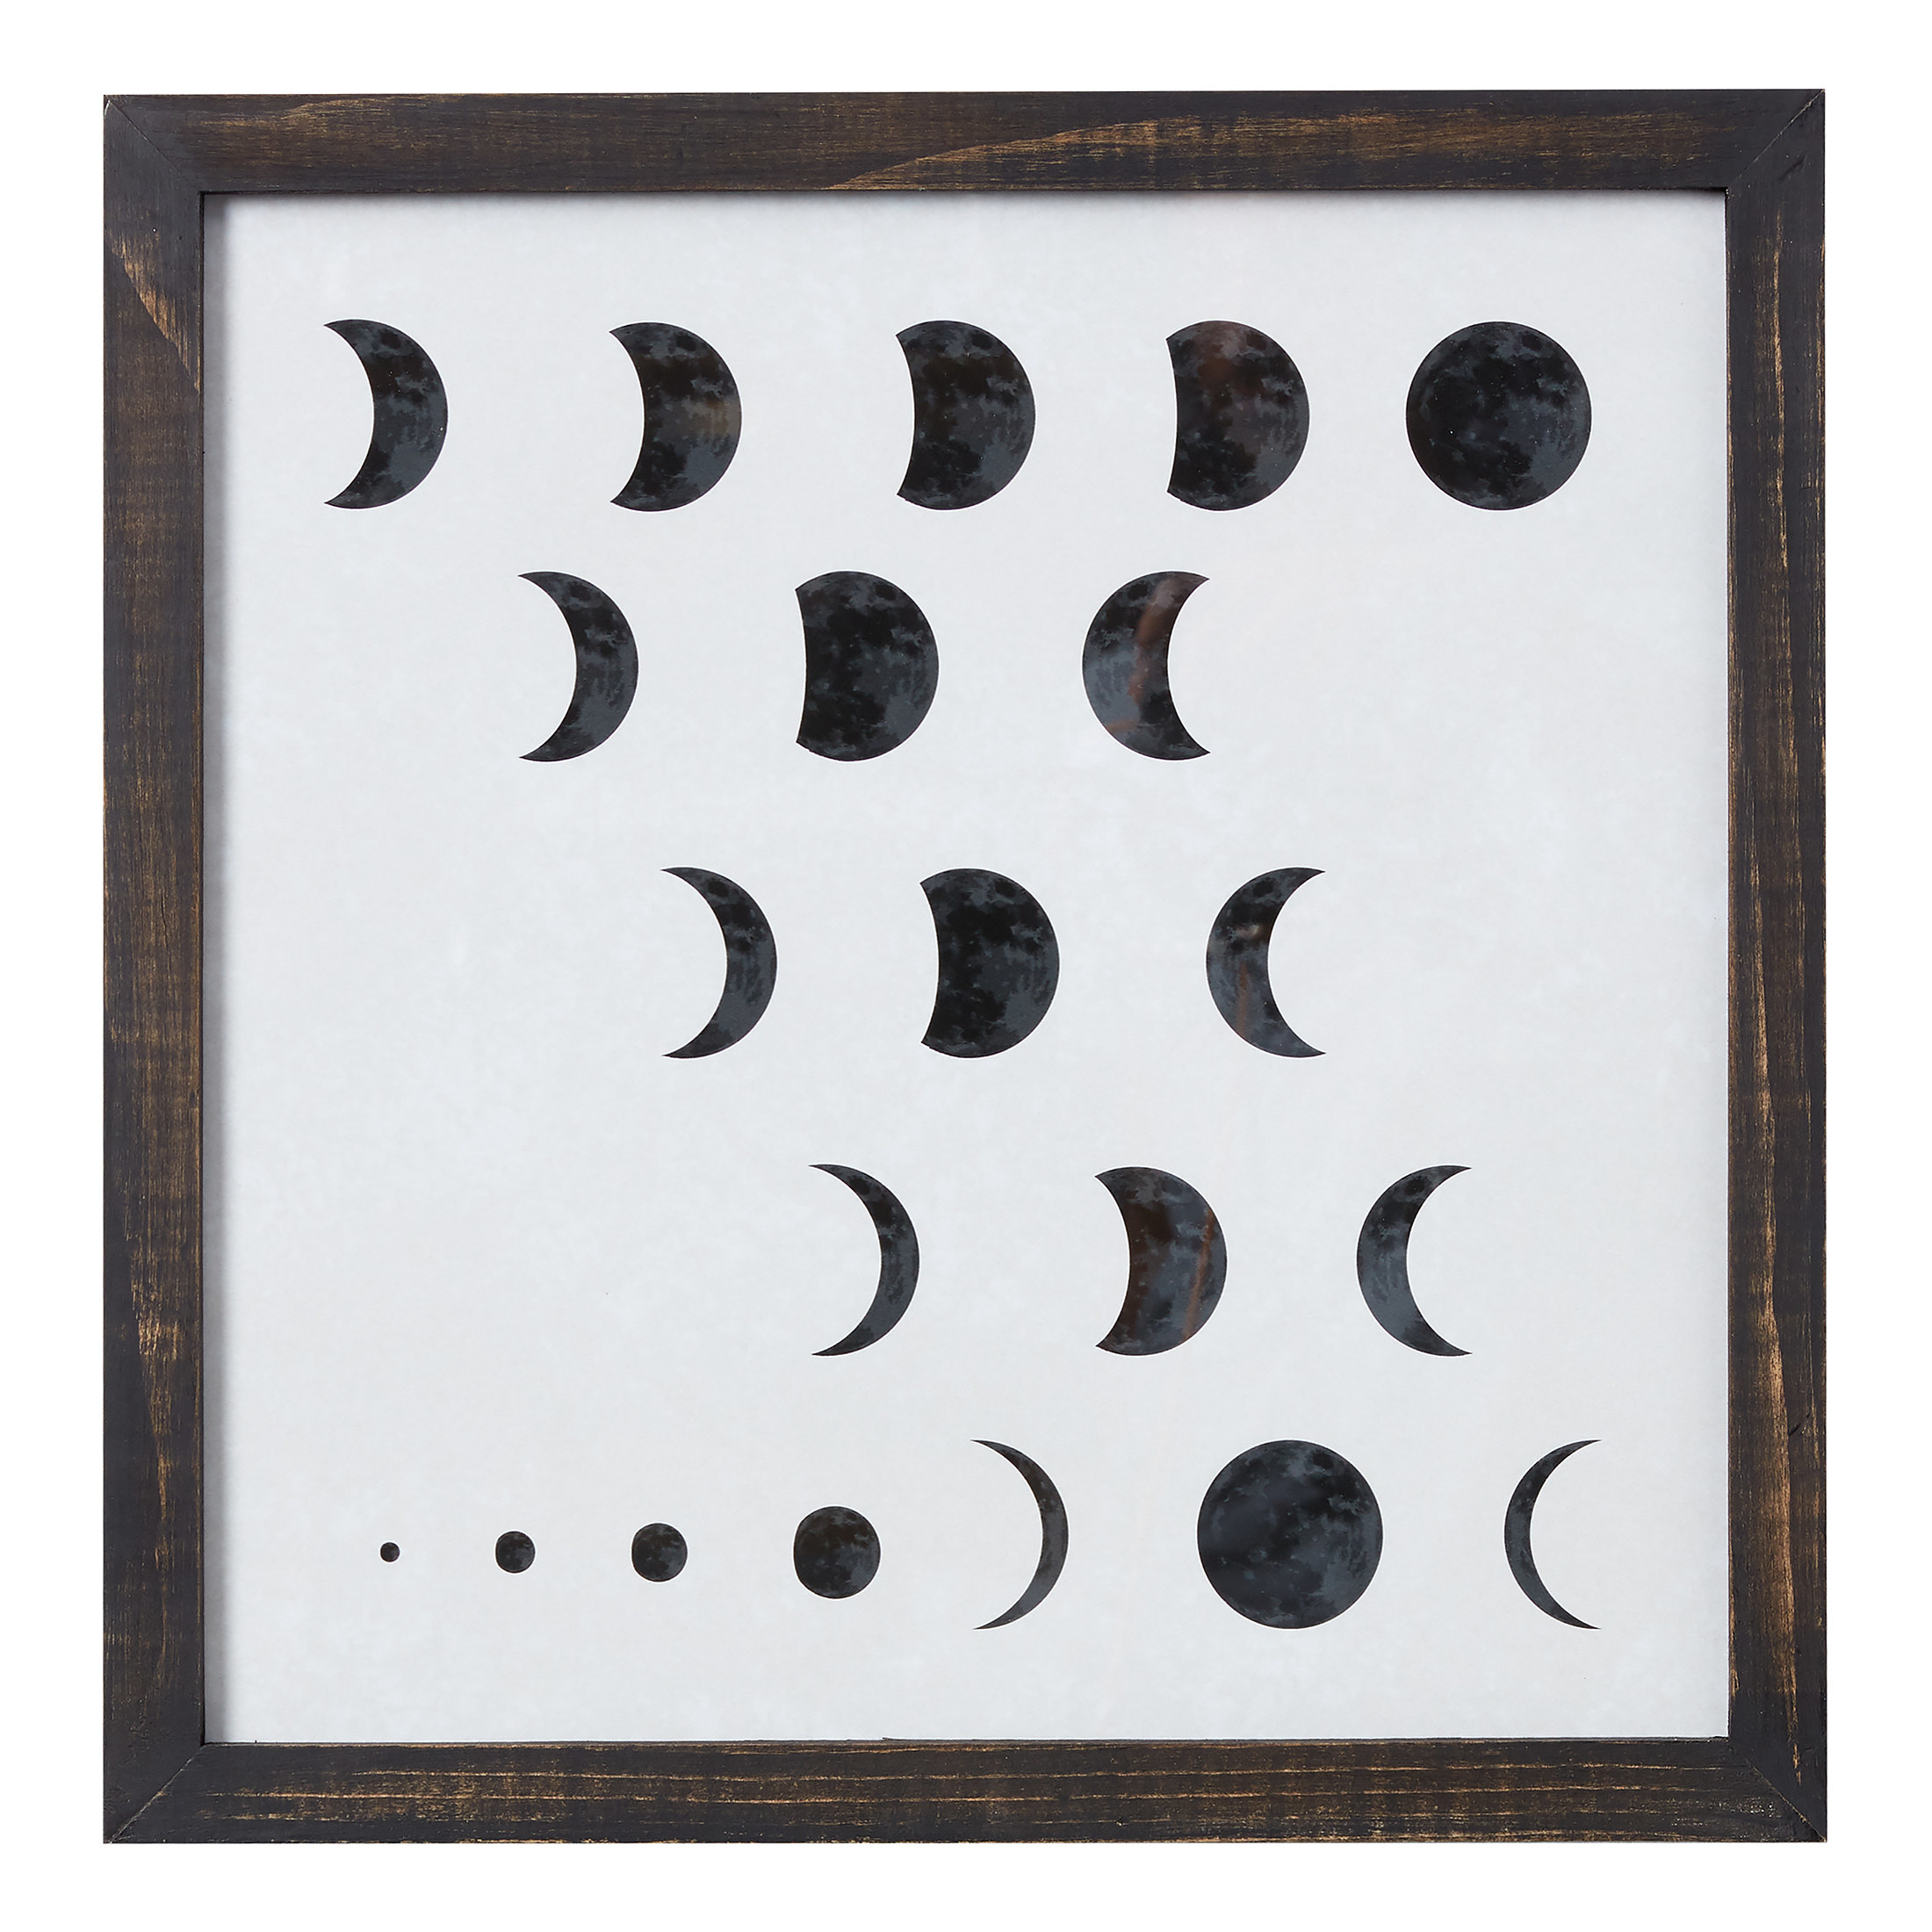 The wall art, featuring different moon phases, in the included dark wooden frame